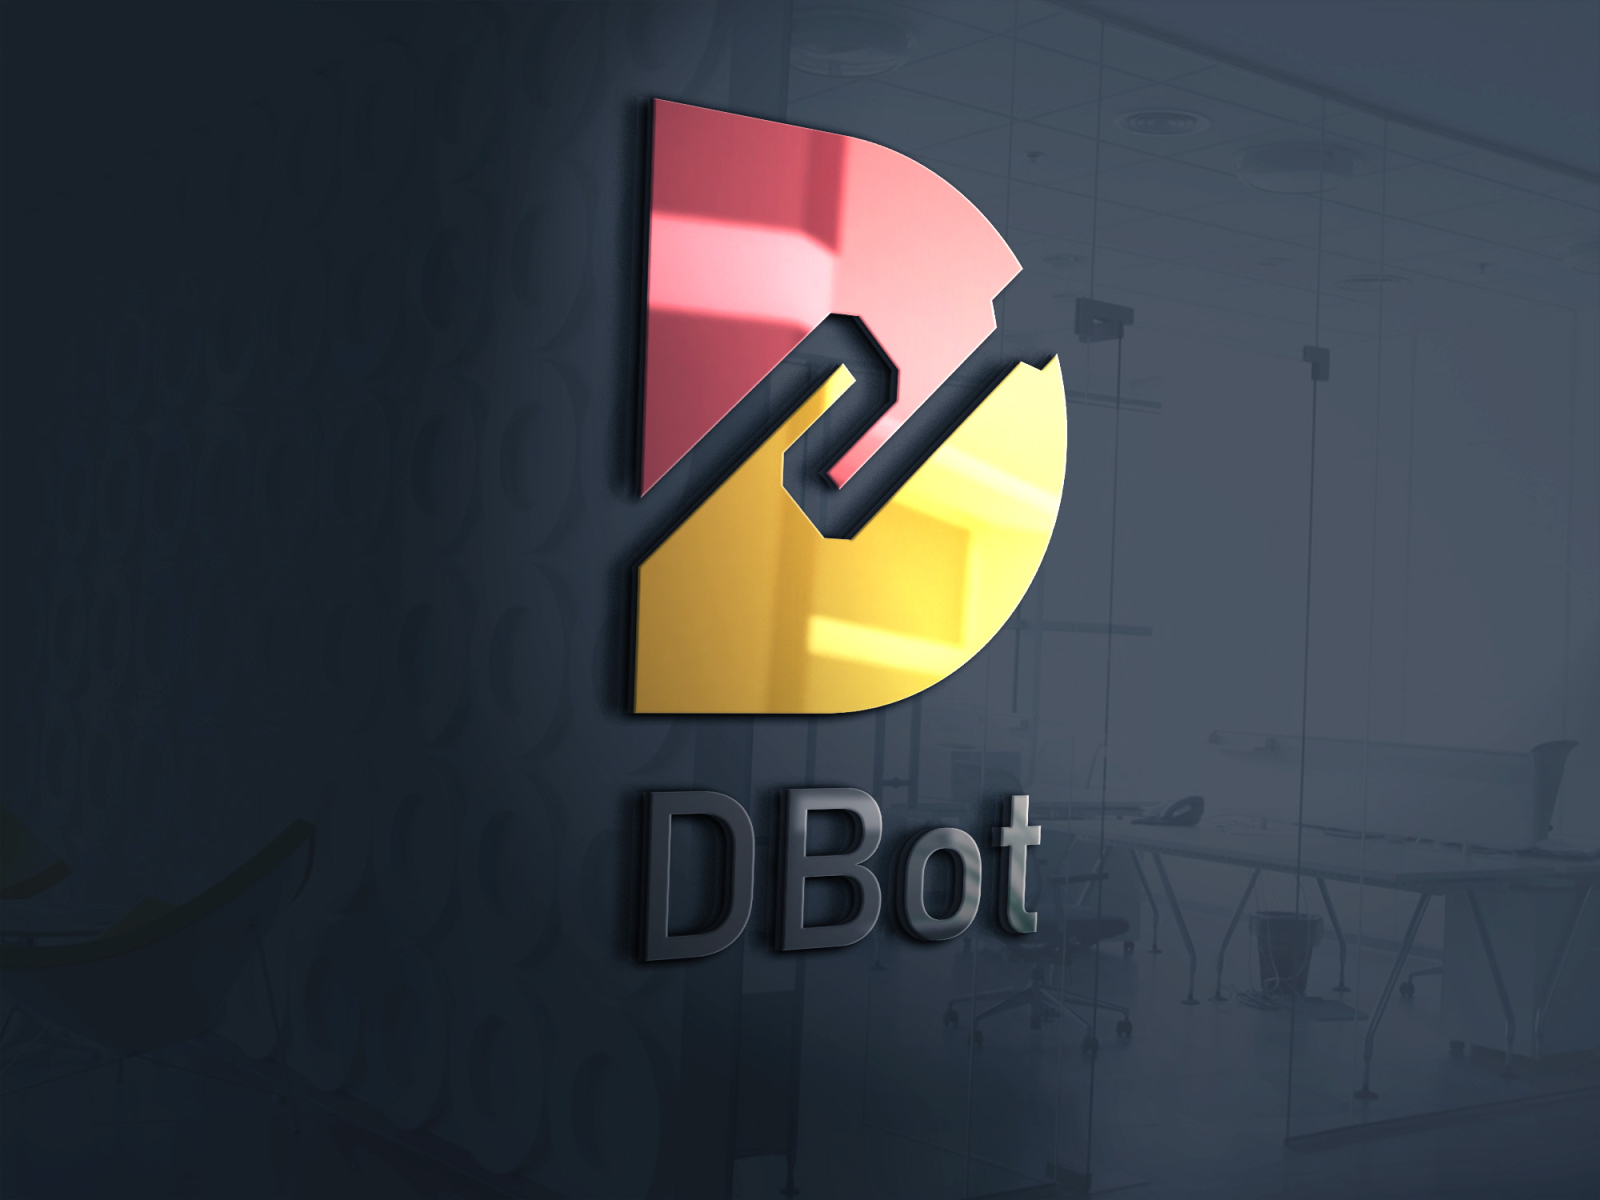 DBot by Nader Abbass on Dribbble